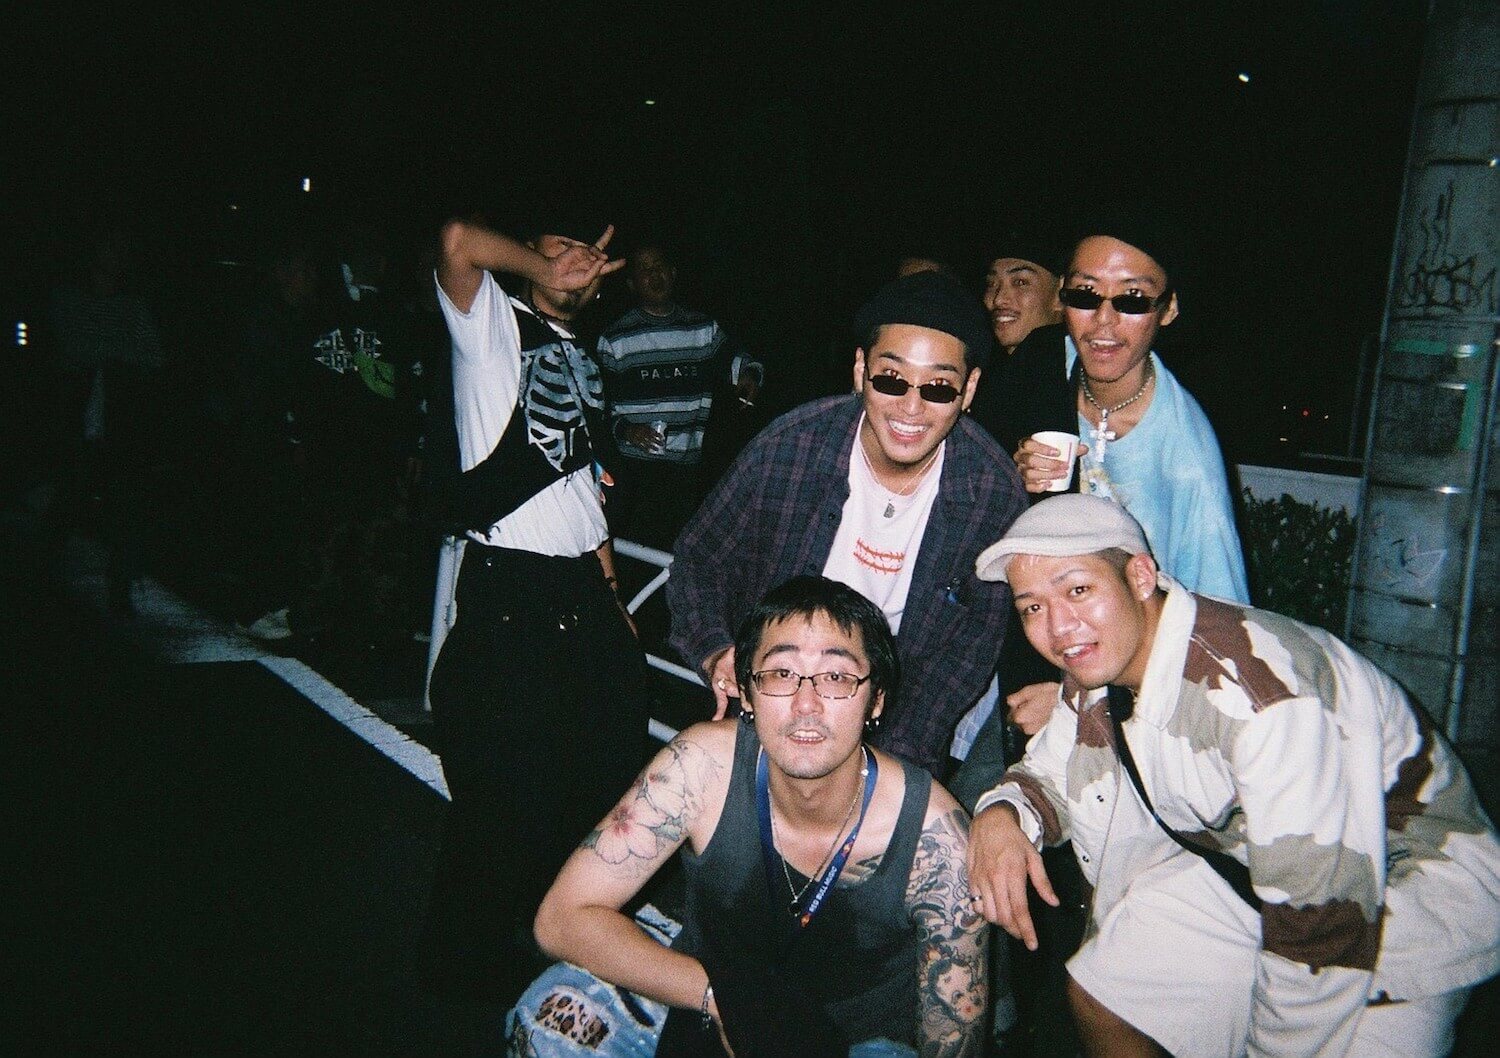 RED BULL MUSIC FESTIVAL TOKYO 2018 PLUG PHOTO BY YENTOWN